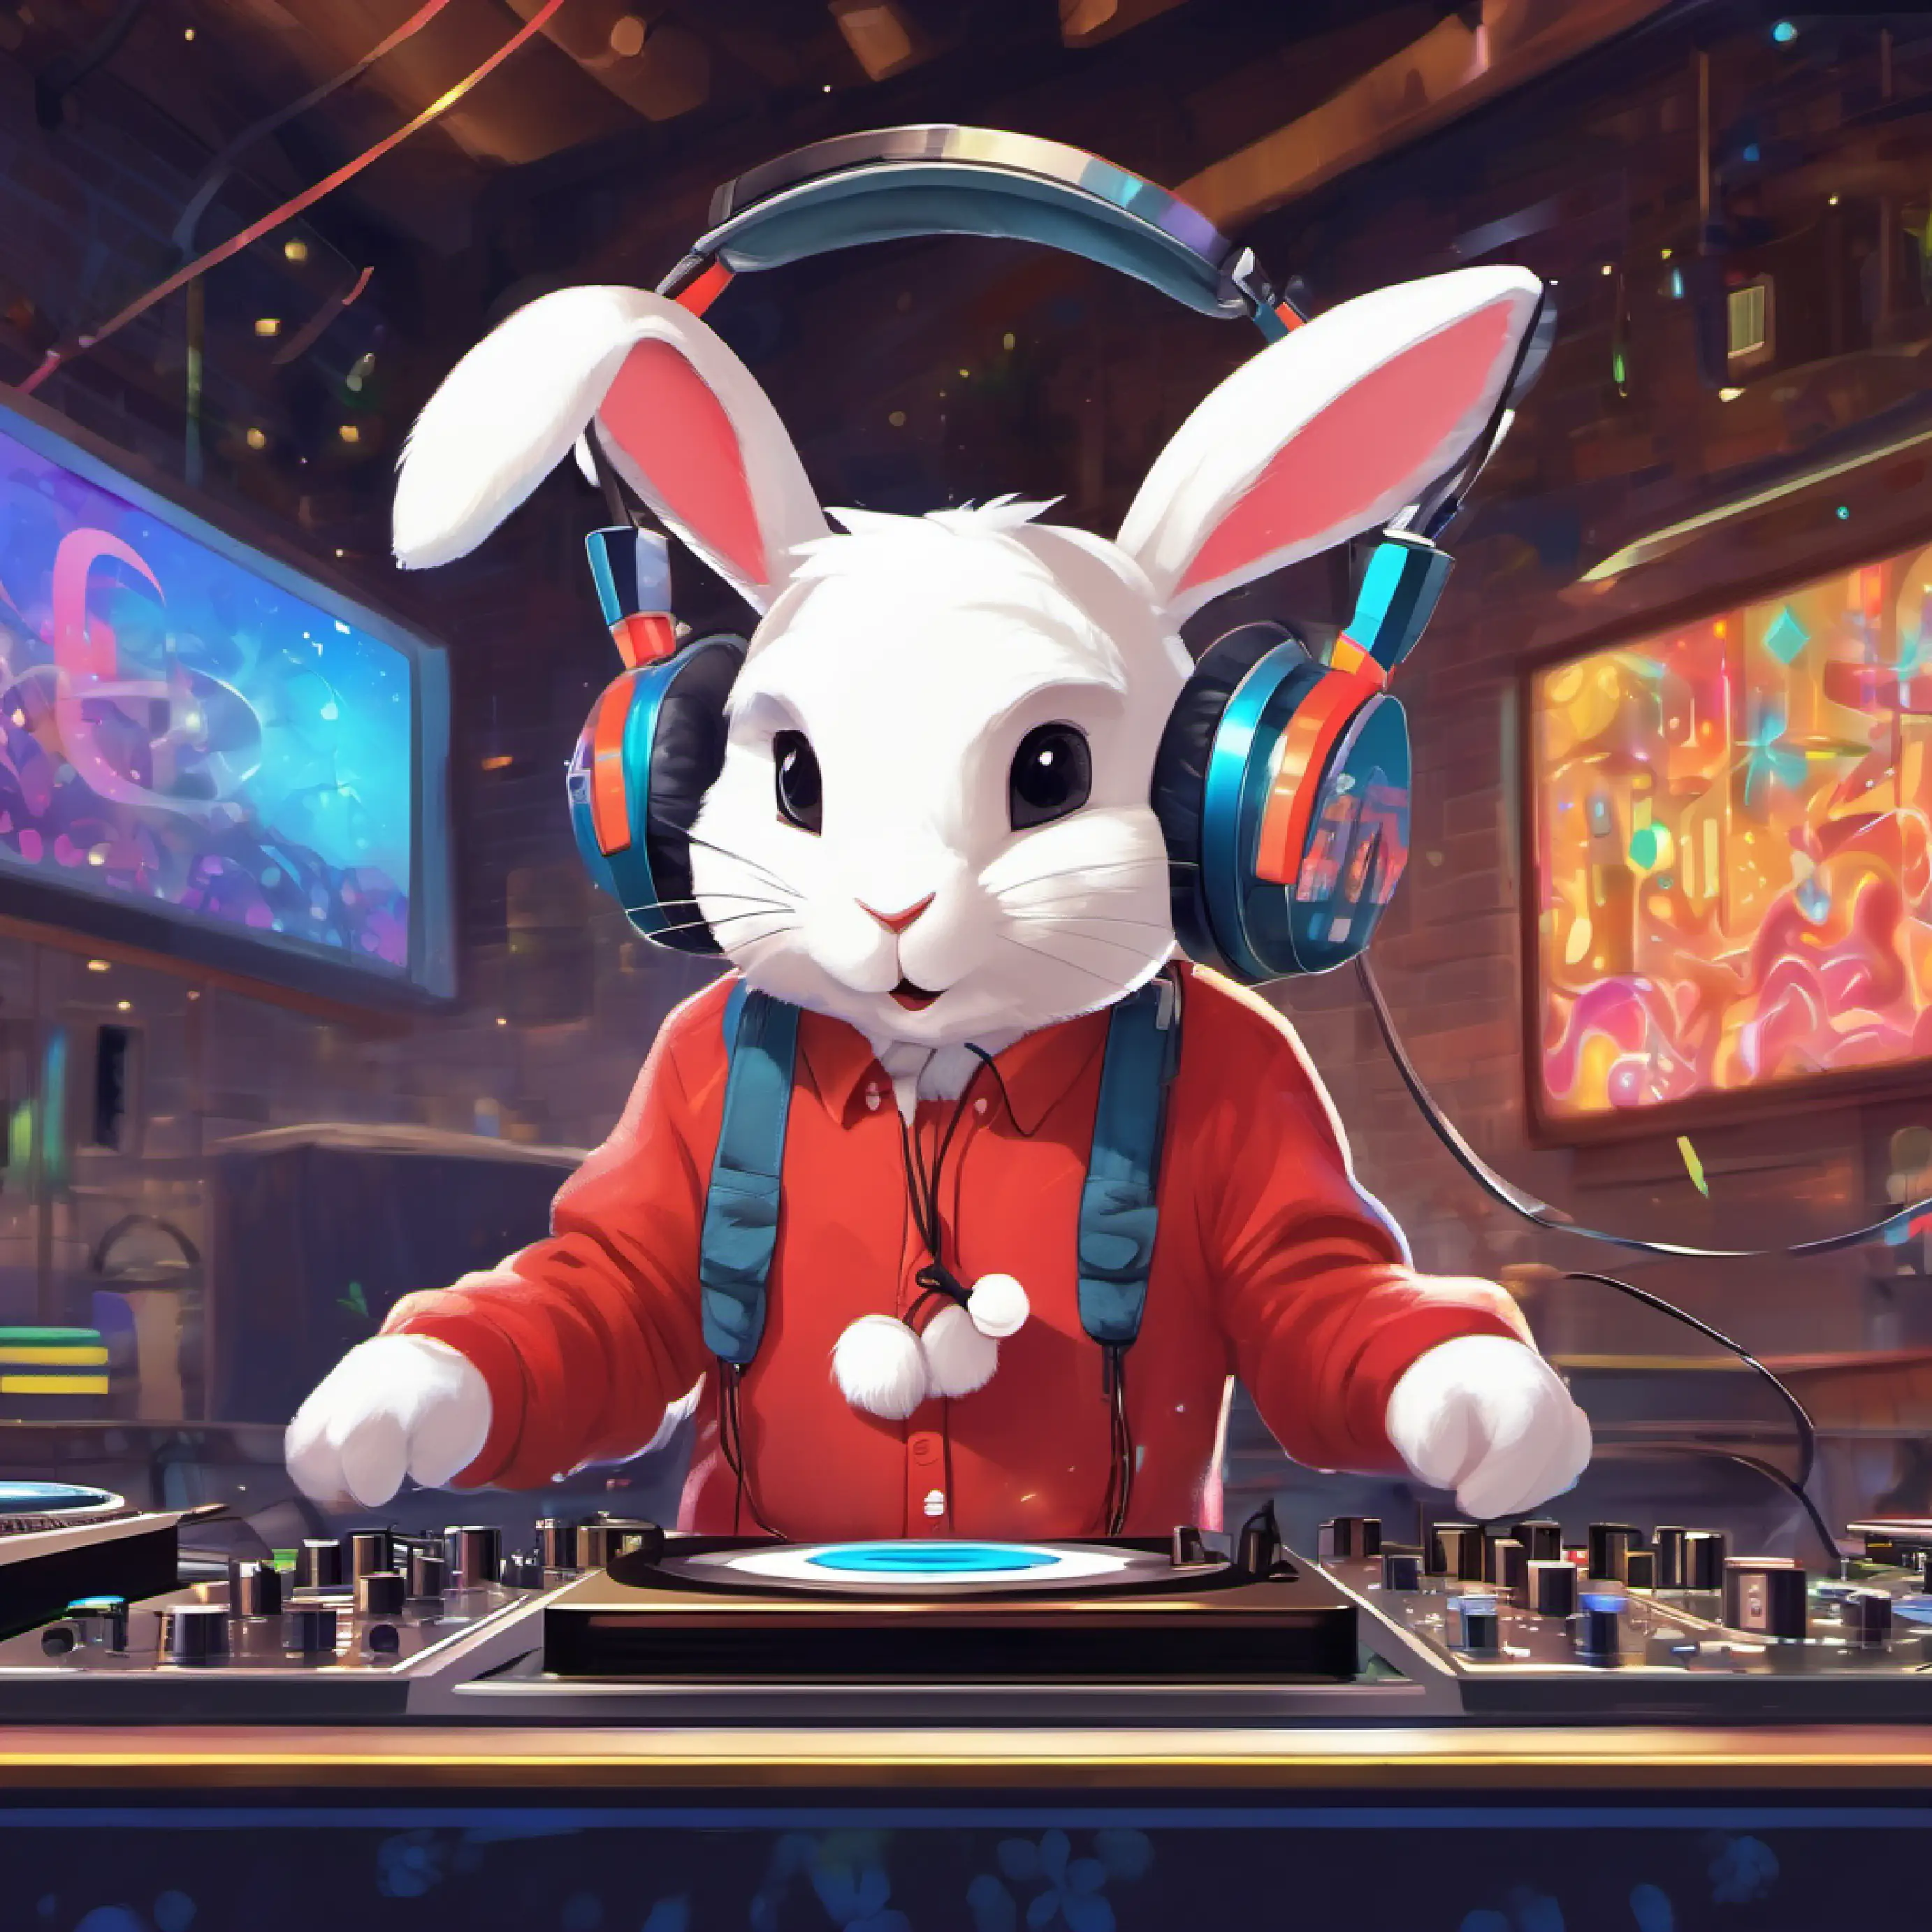 Decision to ask for help, visit Cool DJ Bunny, big headphones, musical notes on shirt, local DJ character